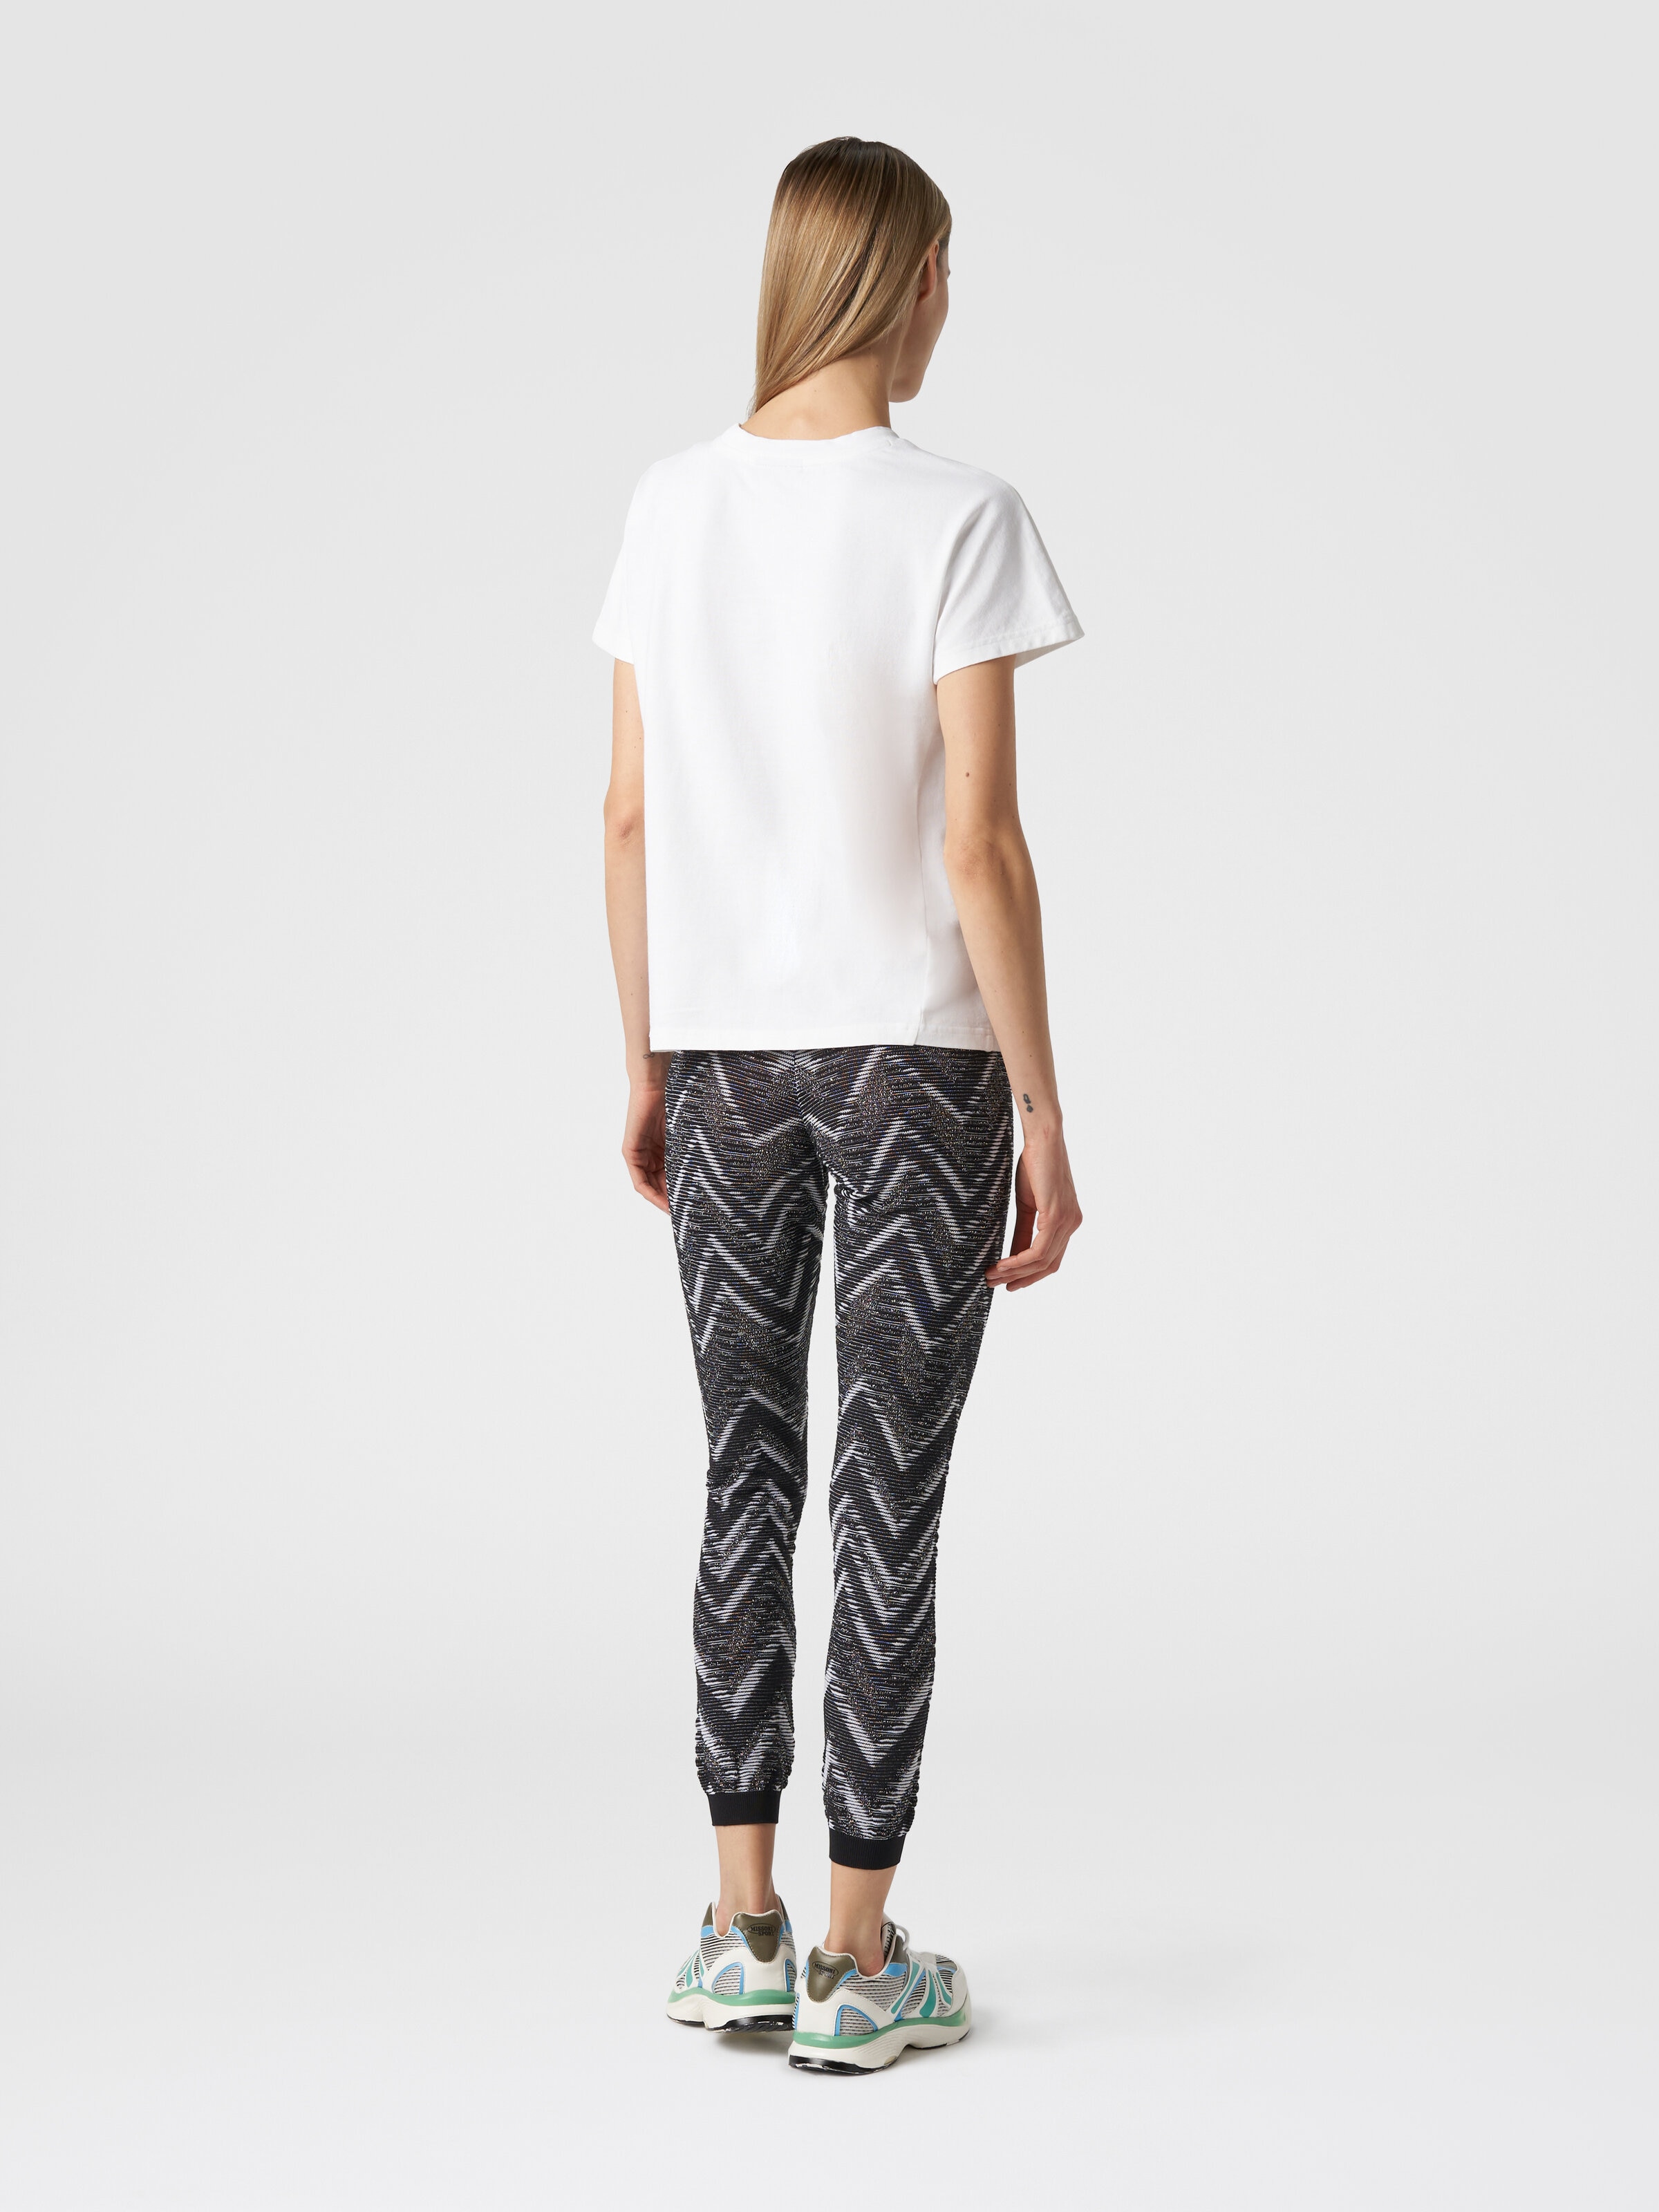 Leggings in knit with lurex and logo, Black & White - 2